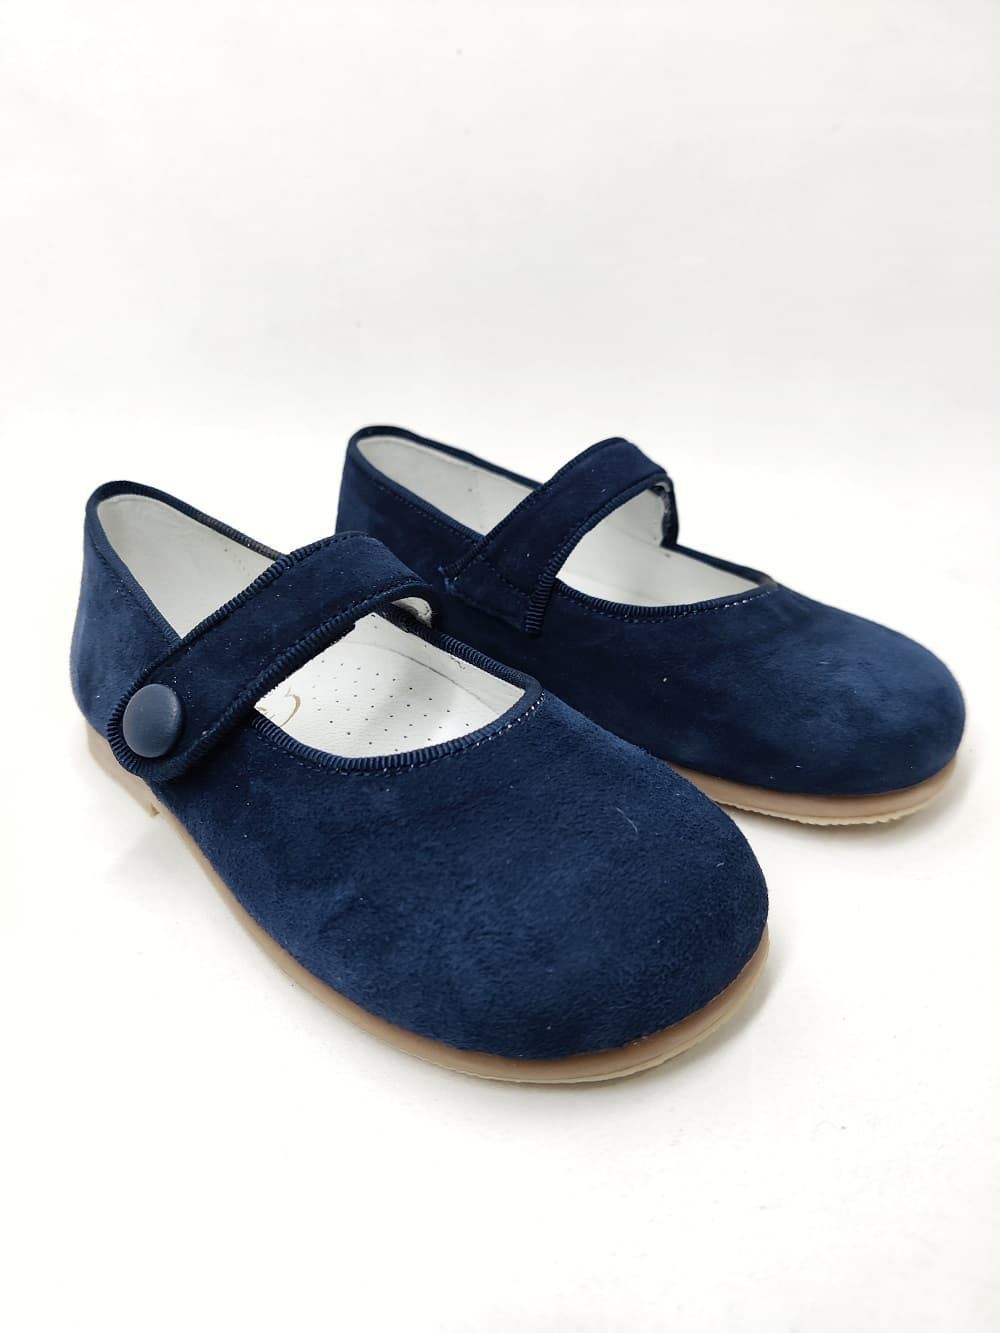 Pirufin Mary Janes for baby girls in Navy Blue suede - Image 1